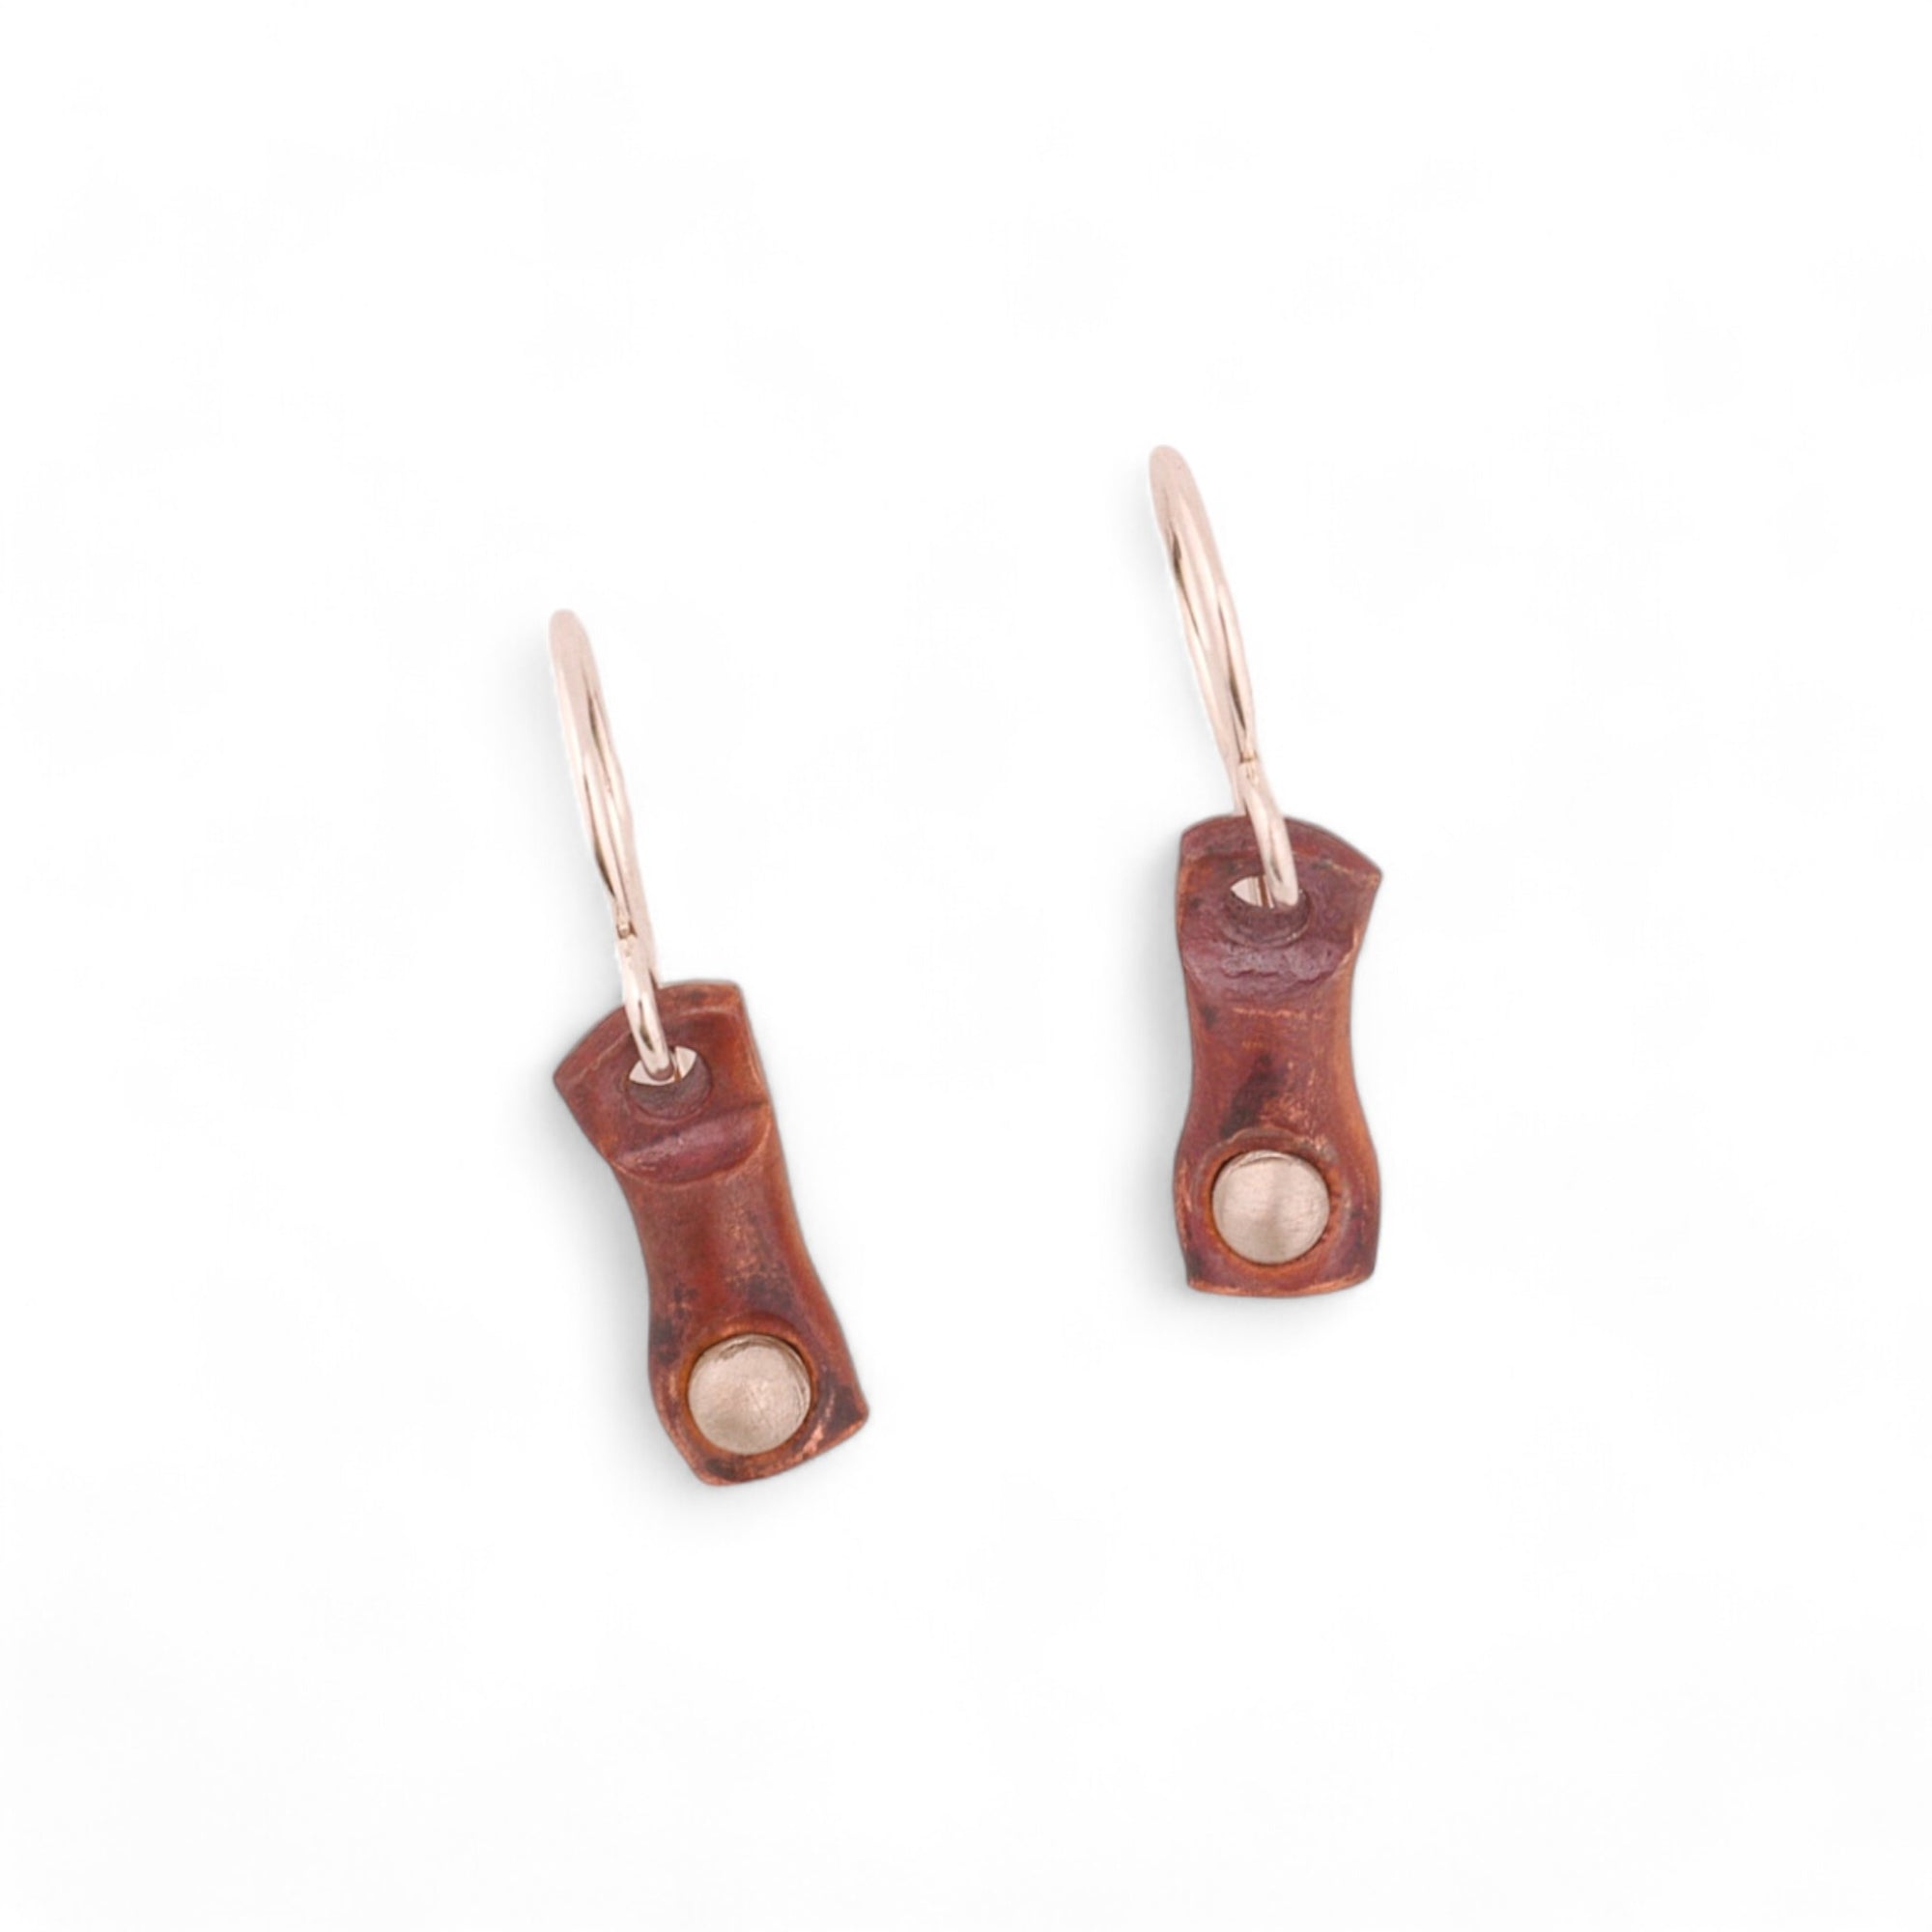 Elegant forged copper earrings with silver pearls